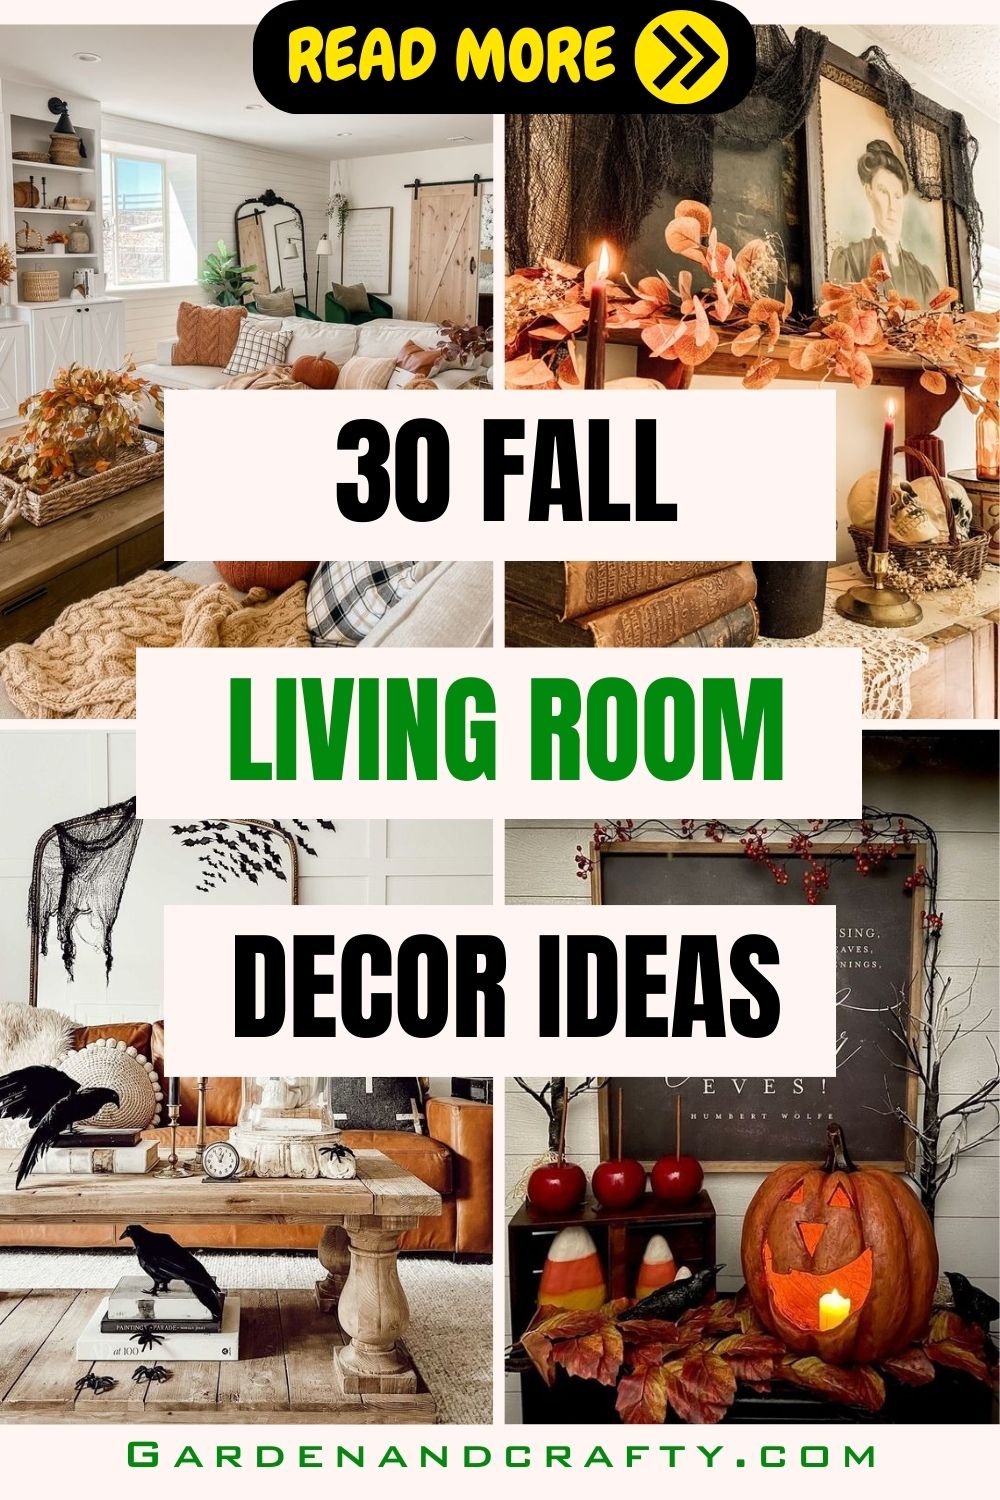 30 Fall Living Room Decor Ideas To Spice Up Your Home